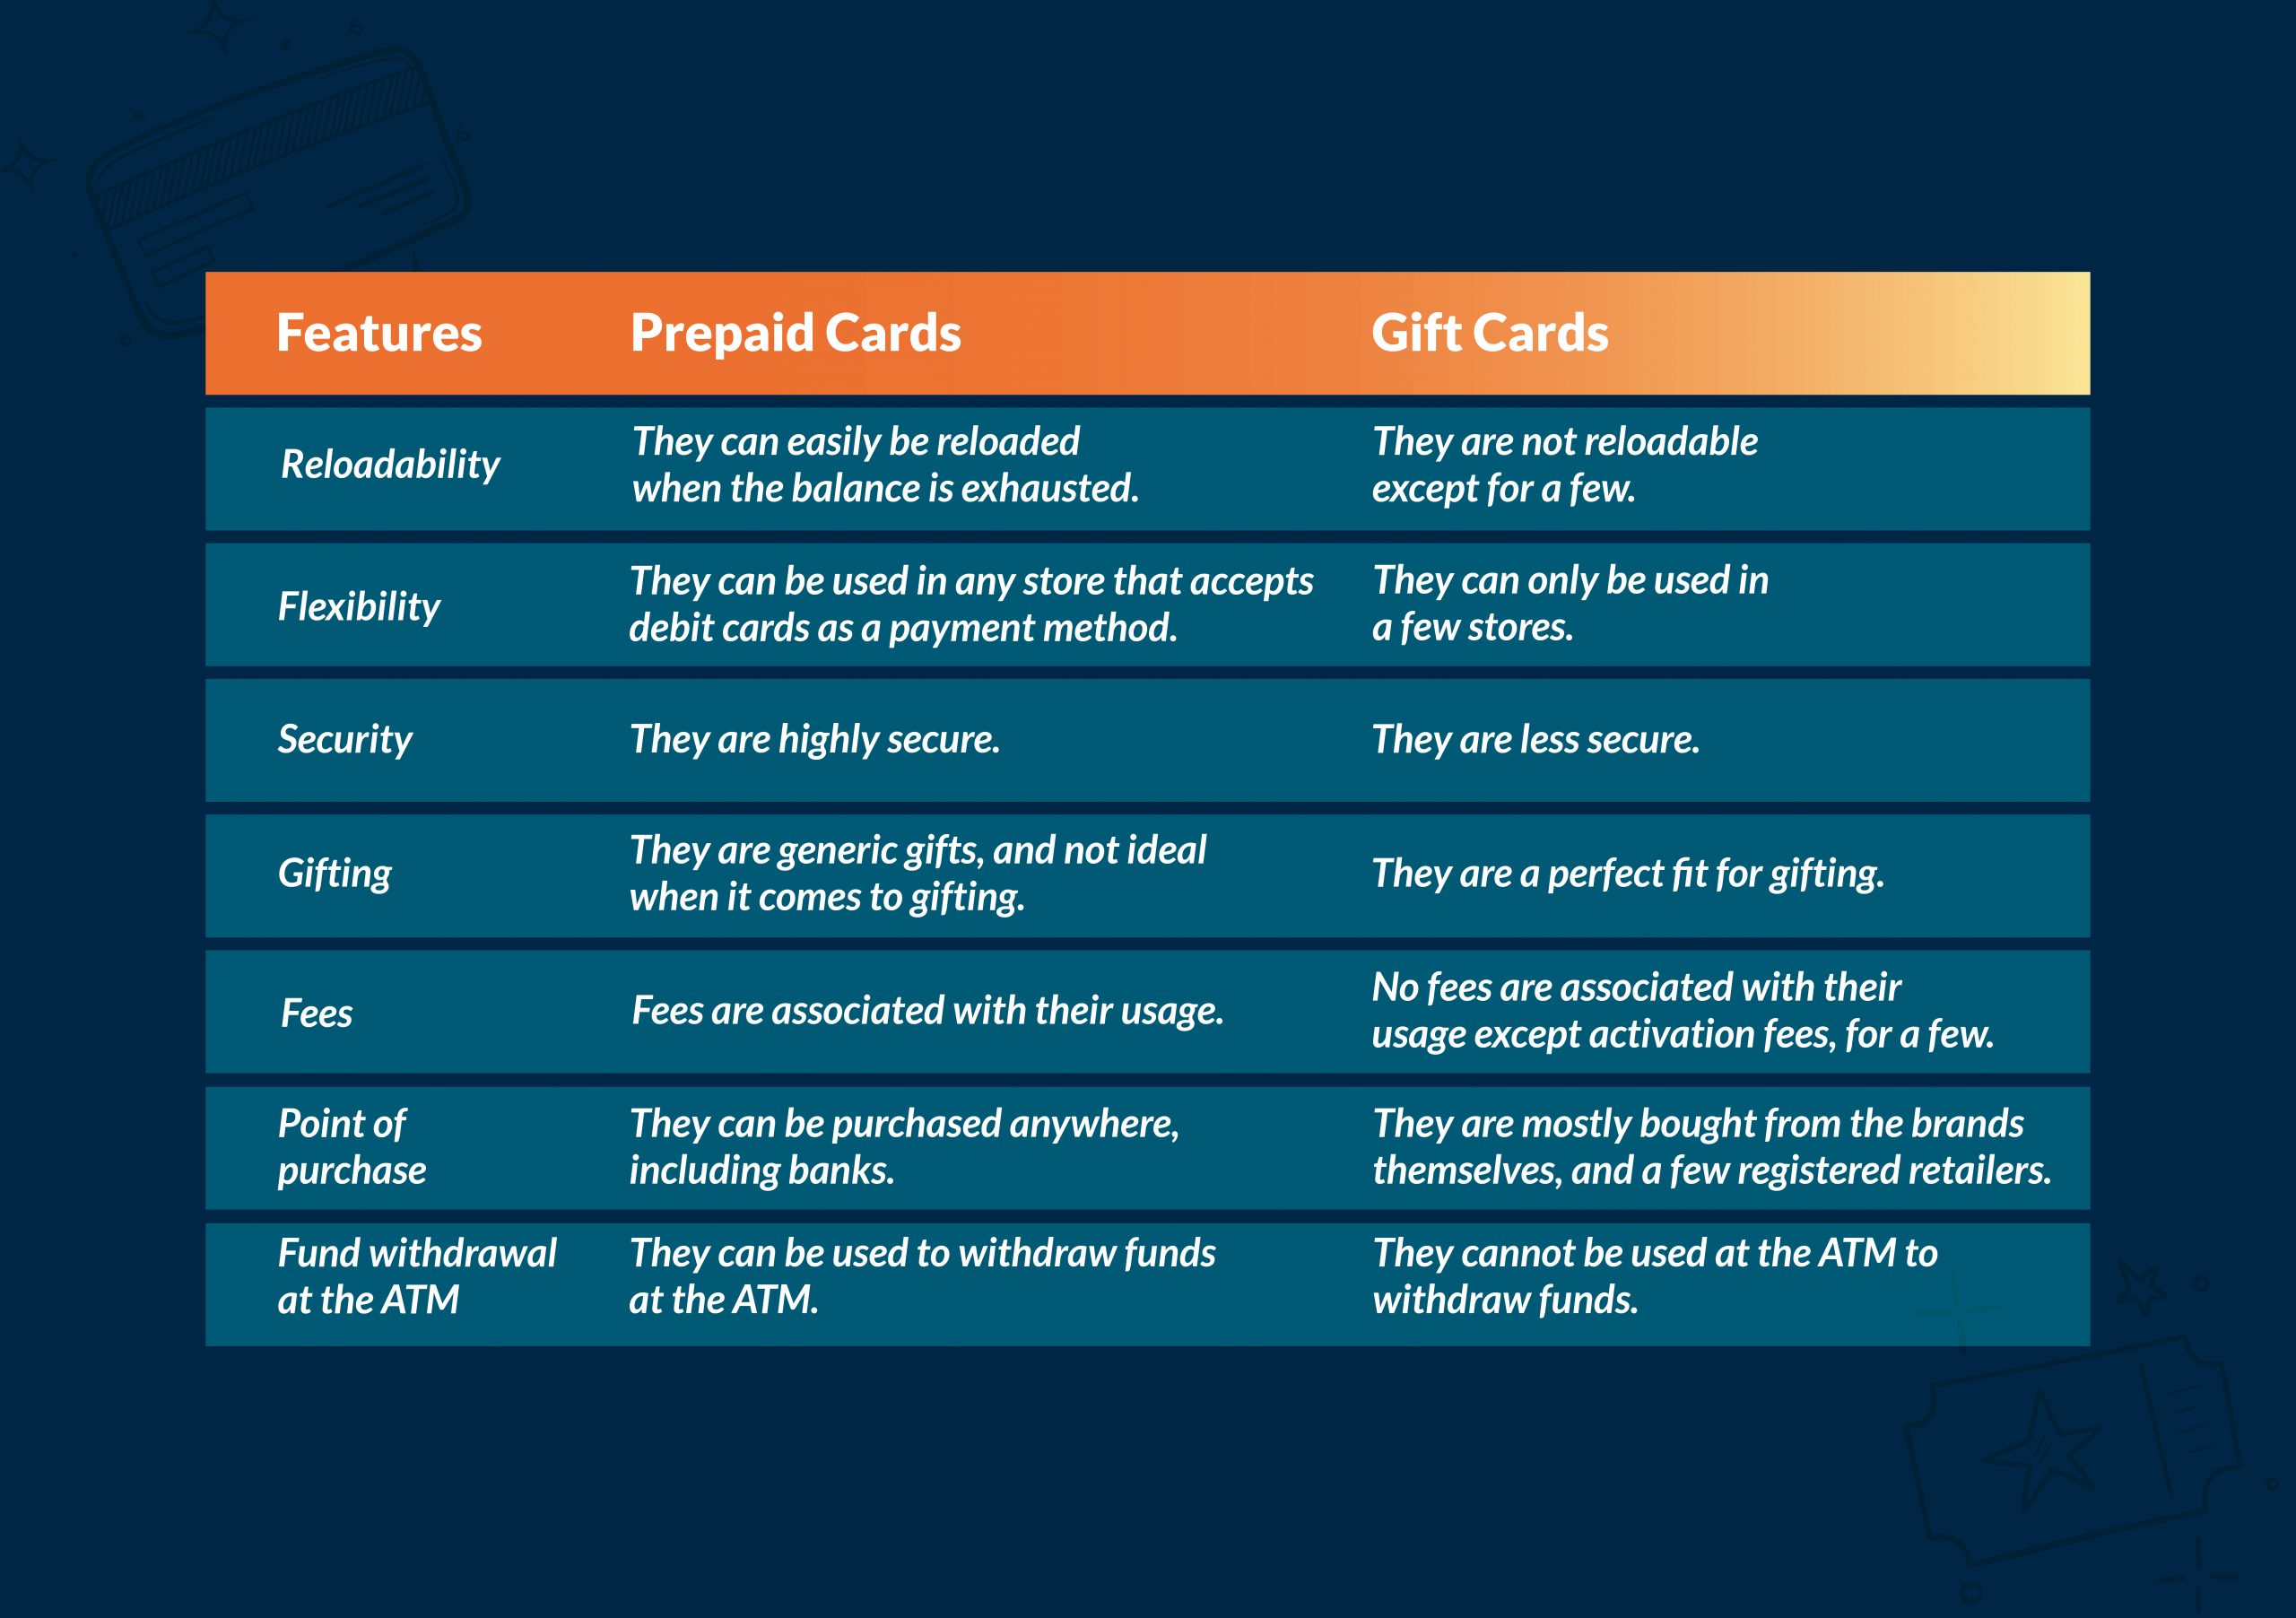 7 Key Differences Between Prepaid Cards And Gift Cards